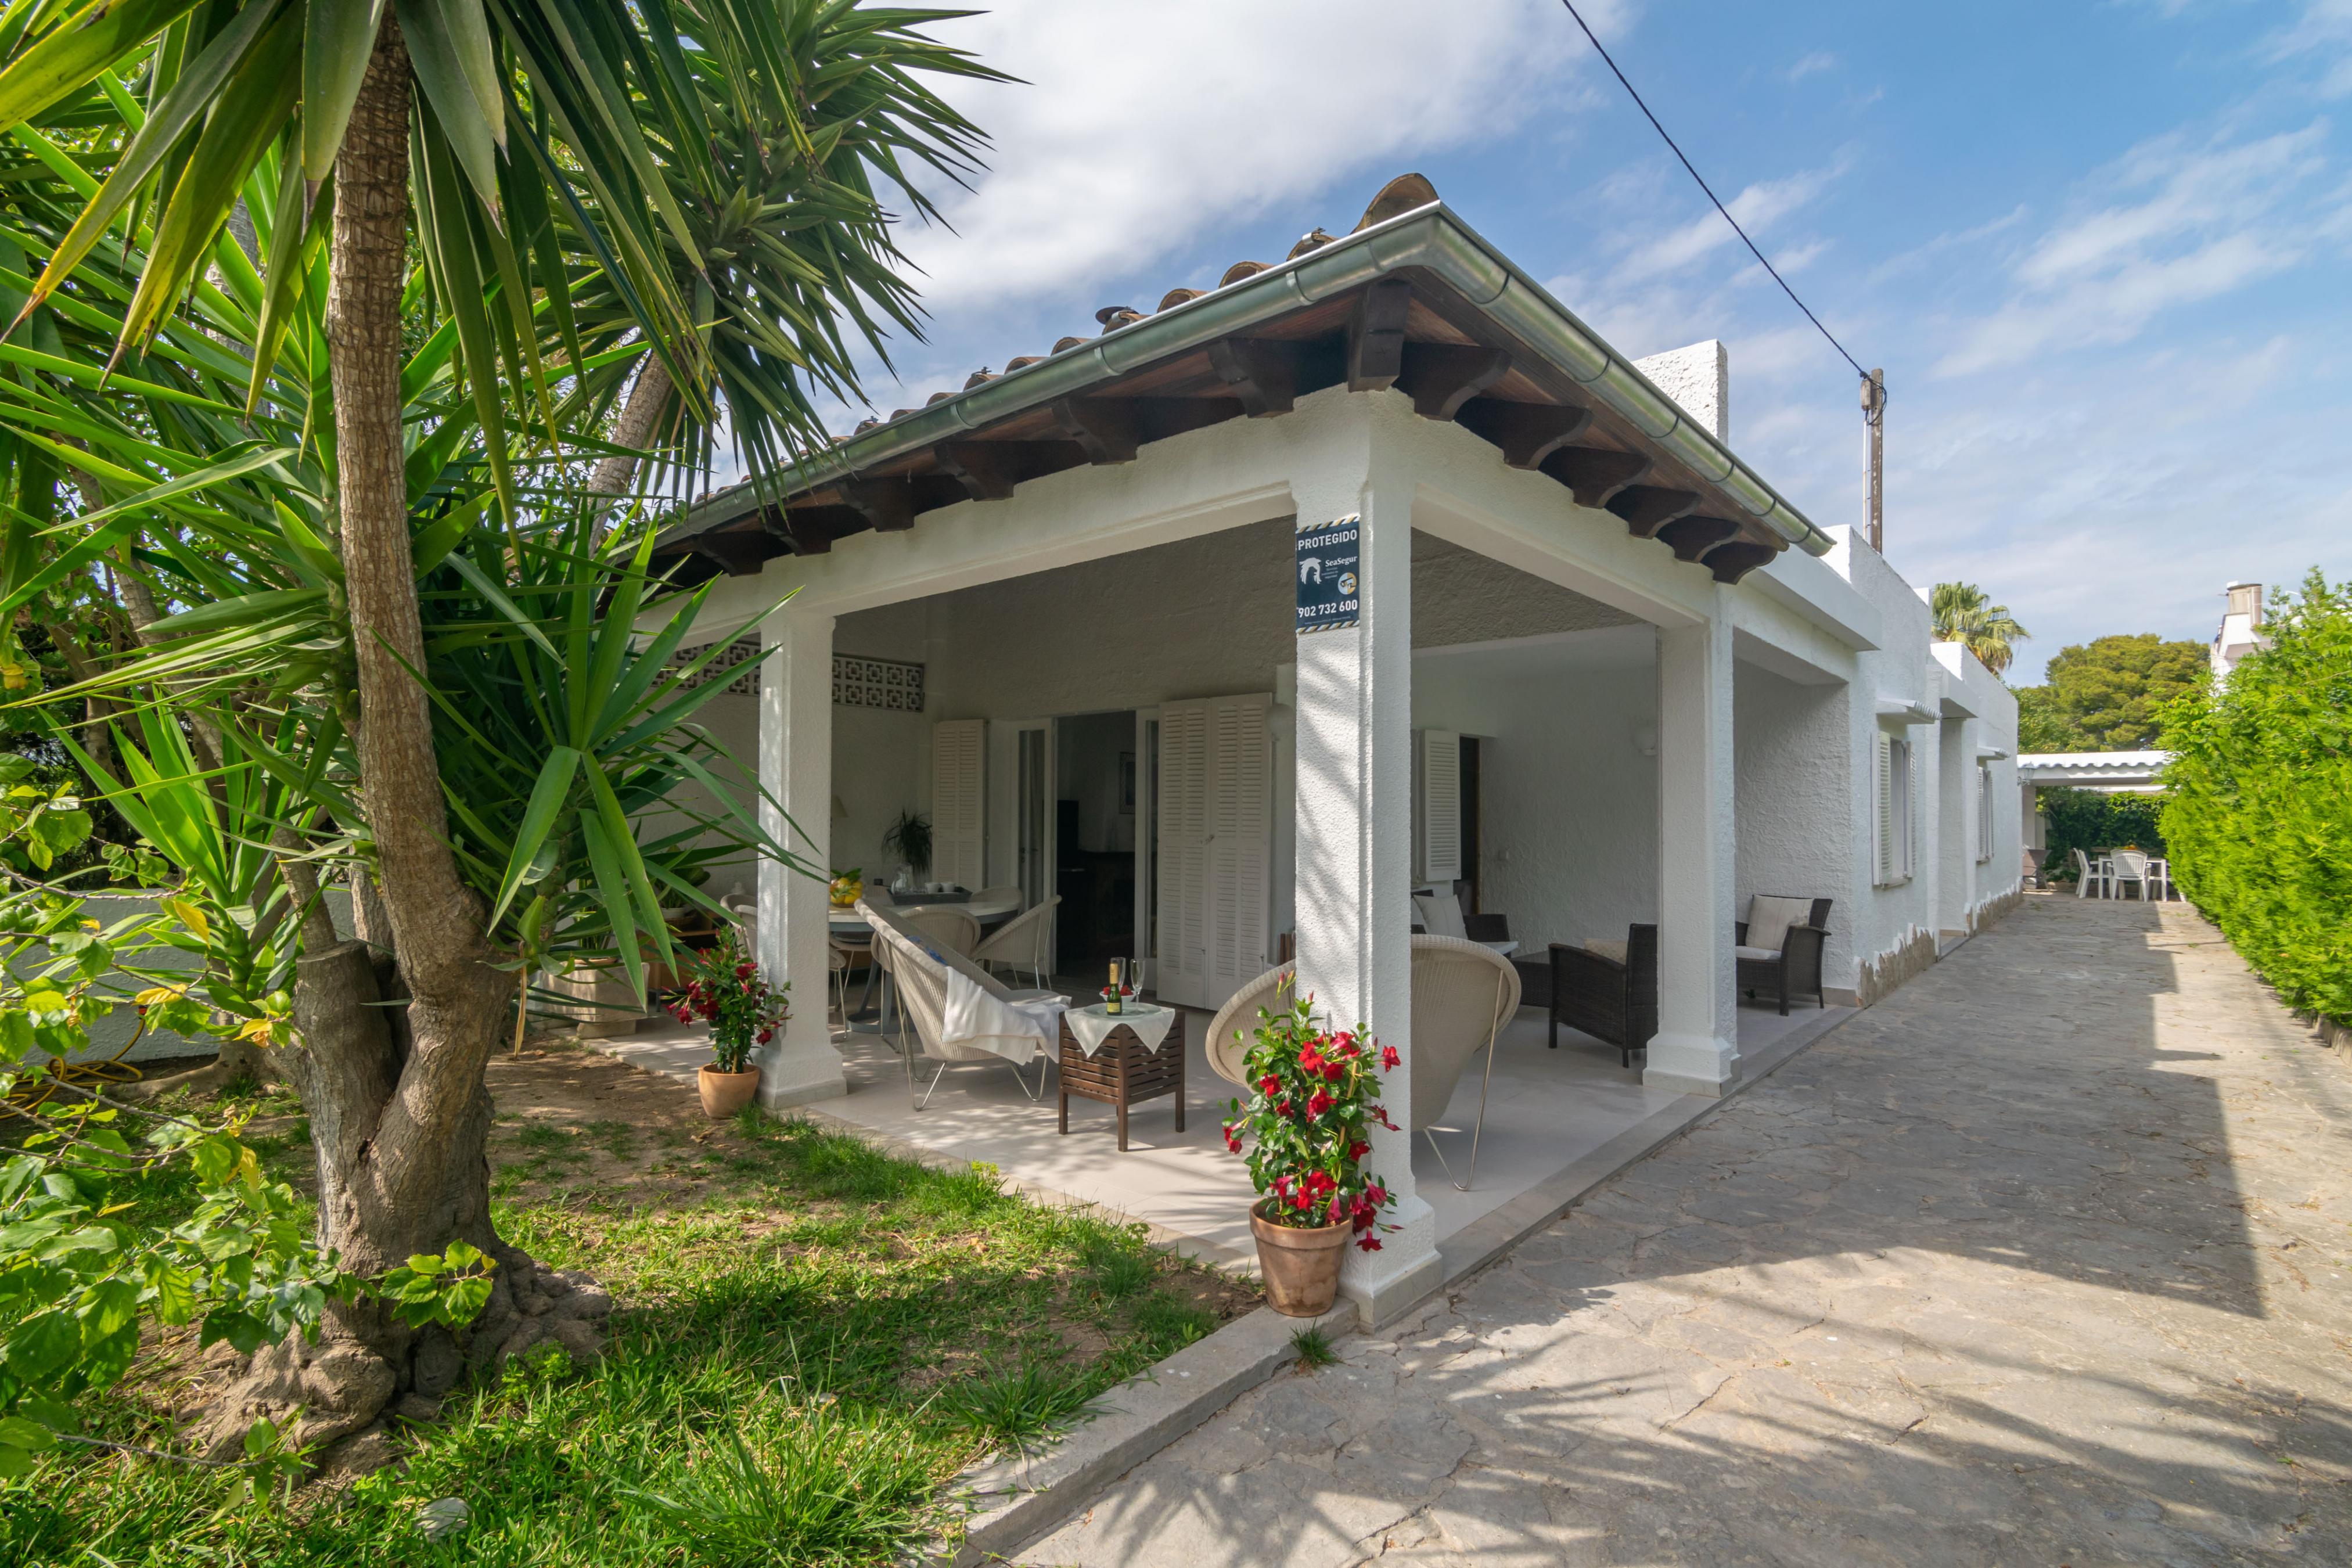 Property Image 2 - VILLA CAMPINS - Coquettish chalet with airy terraces and near the beach. Free WiFi